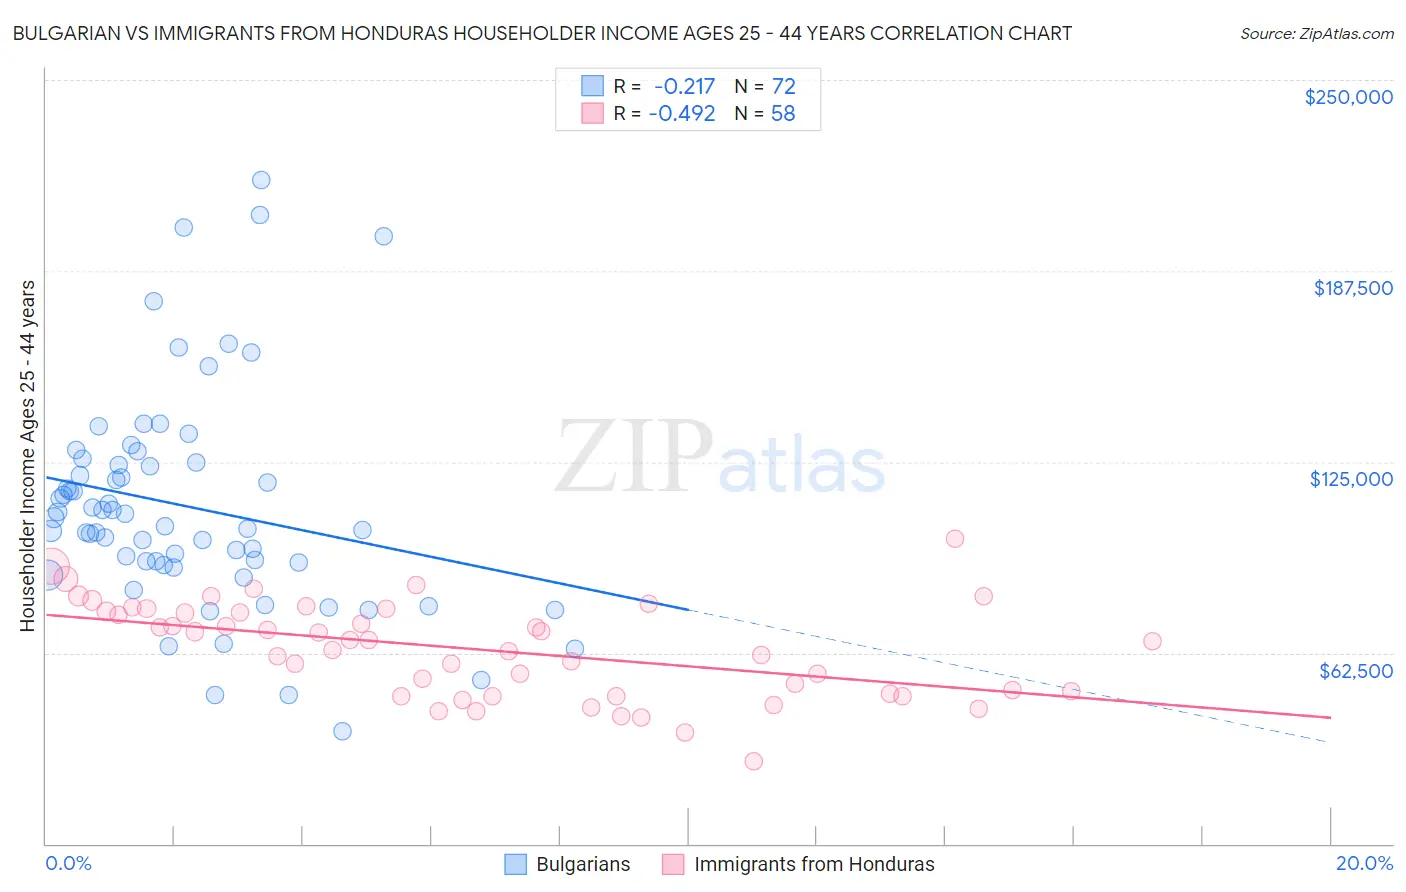 Bulgarian vs Immigrants from Honduras Householder Income Ages 25 - 44 years